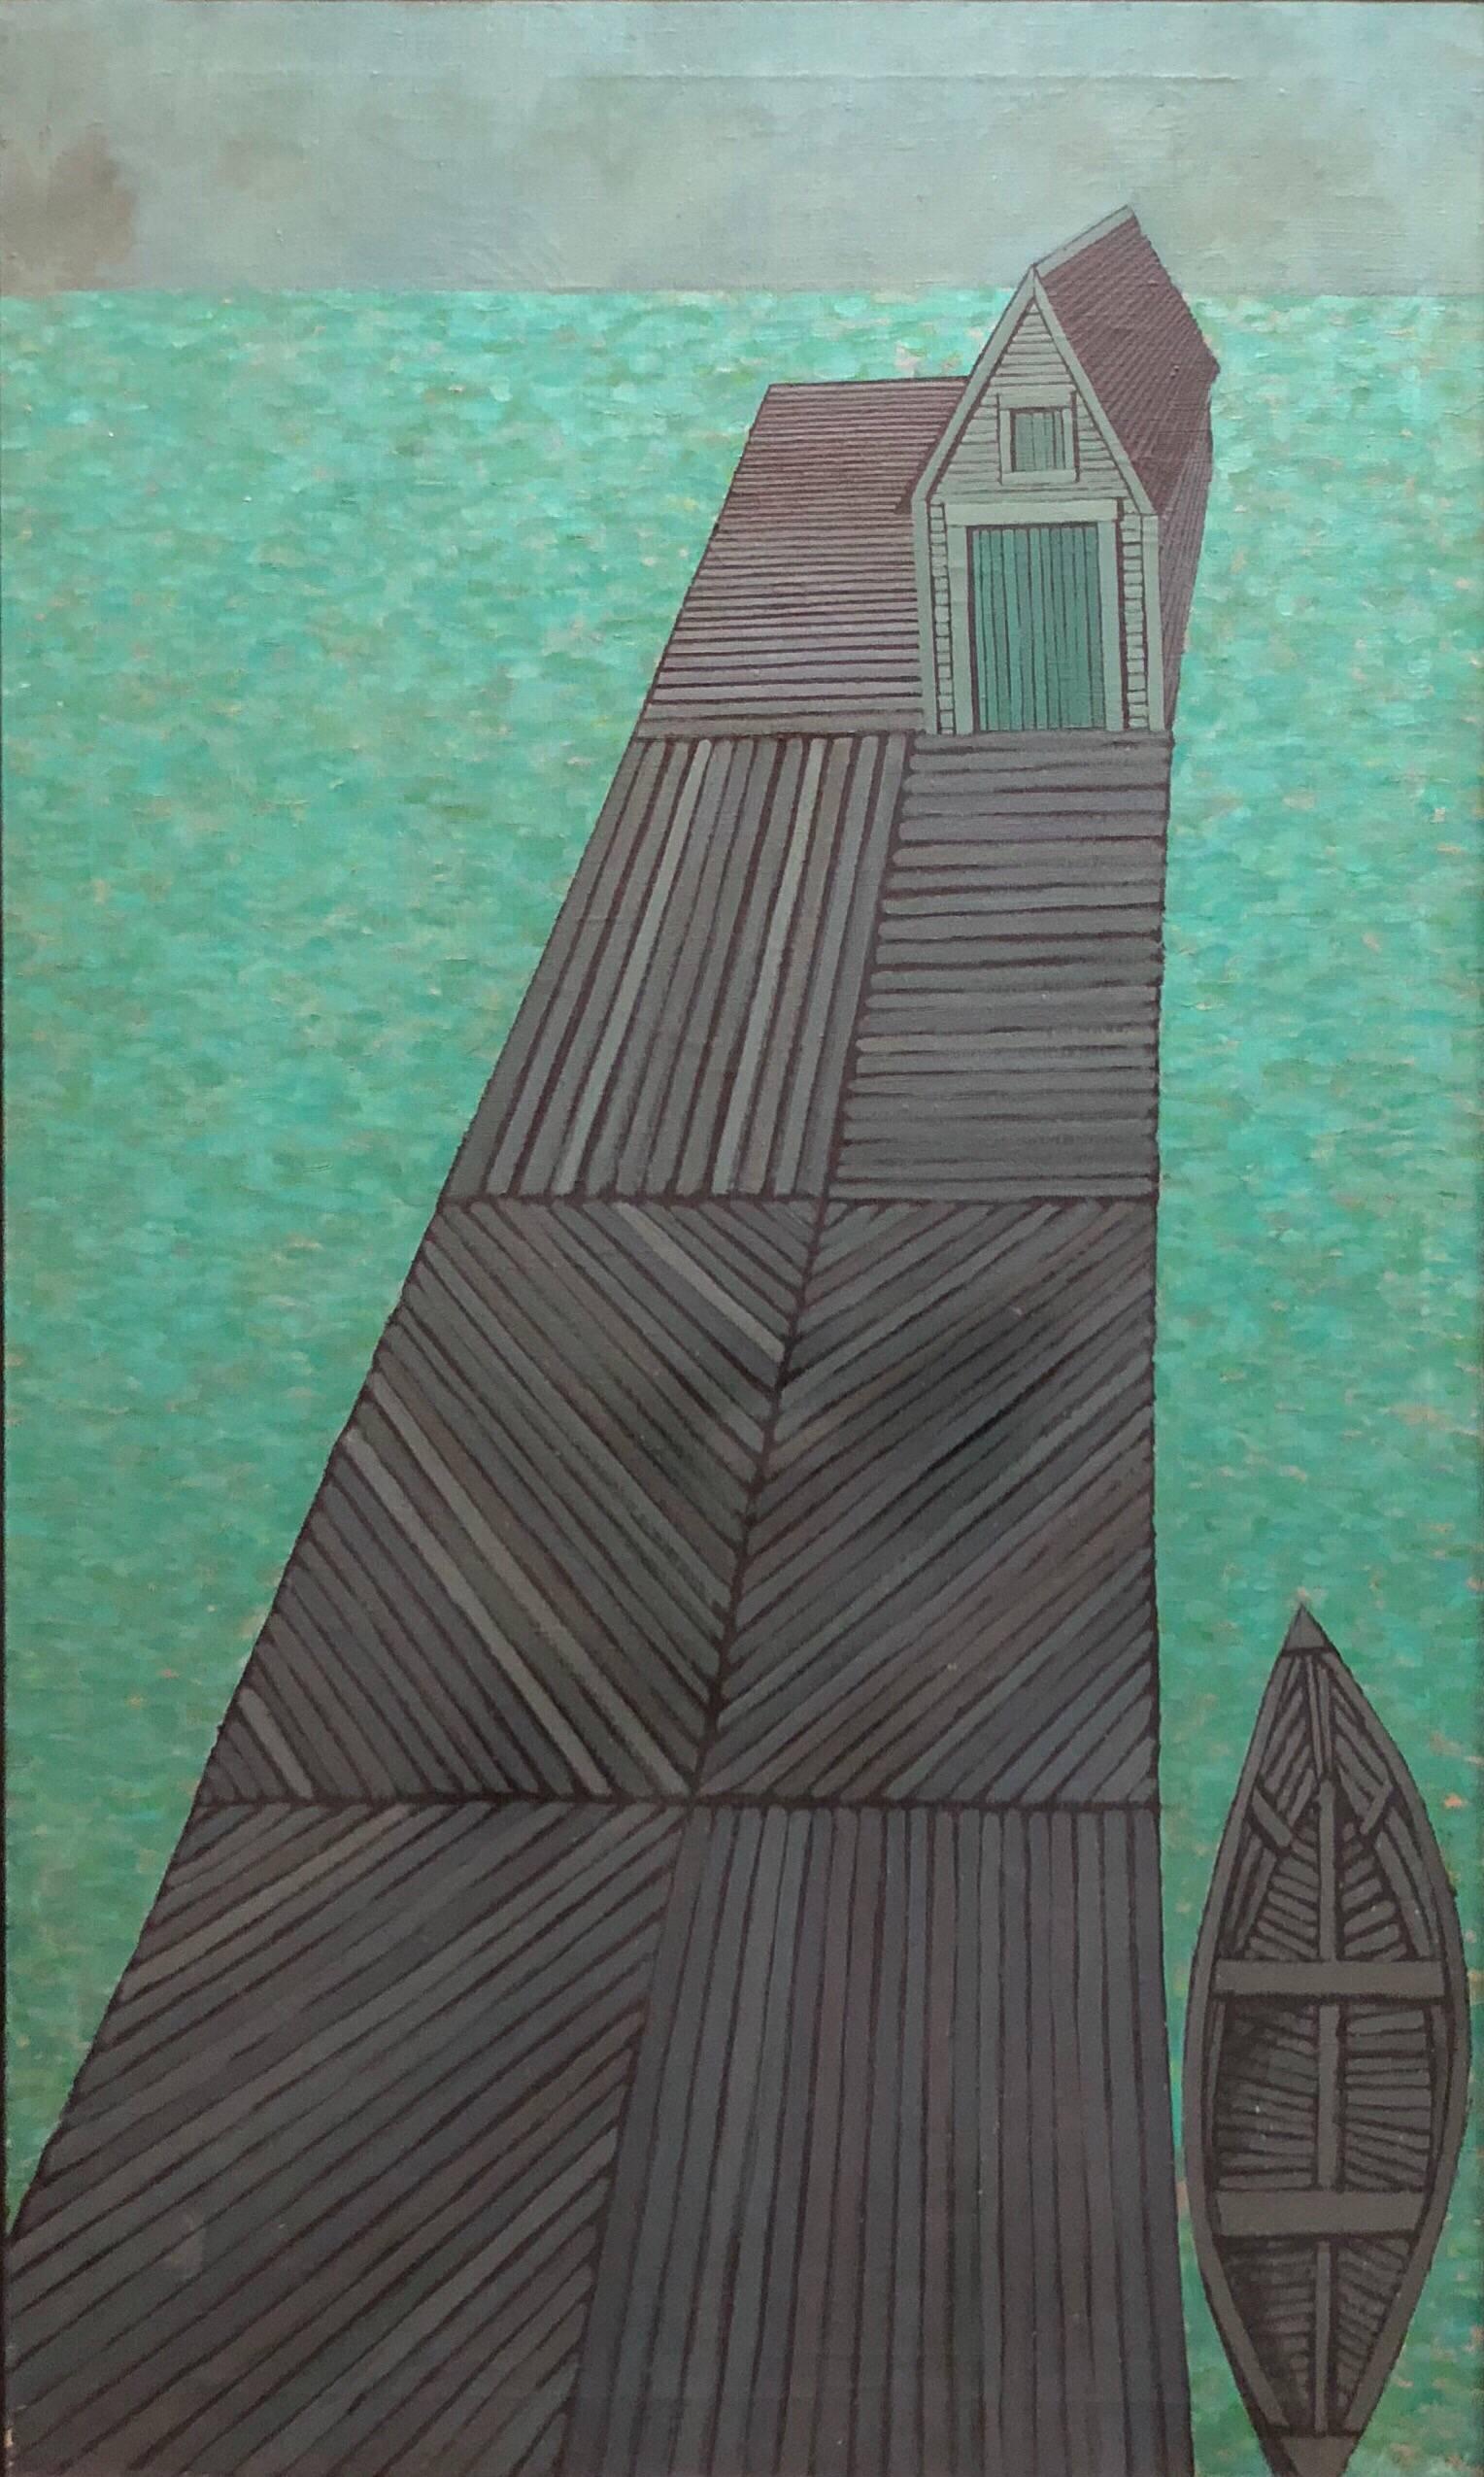 In this painting by Judith Shahn, the artist renders a boat and dock in a series of lines. The artist takes a naive approach at depicting the subject by simplifying the elements in the composition to its basic abstract geometric forms, and to